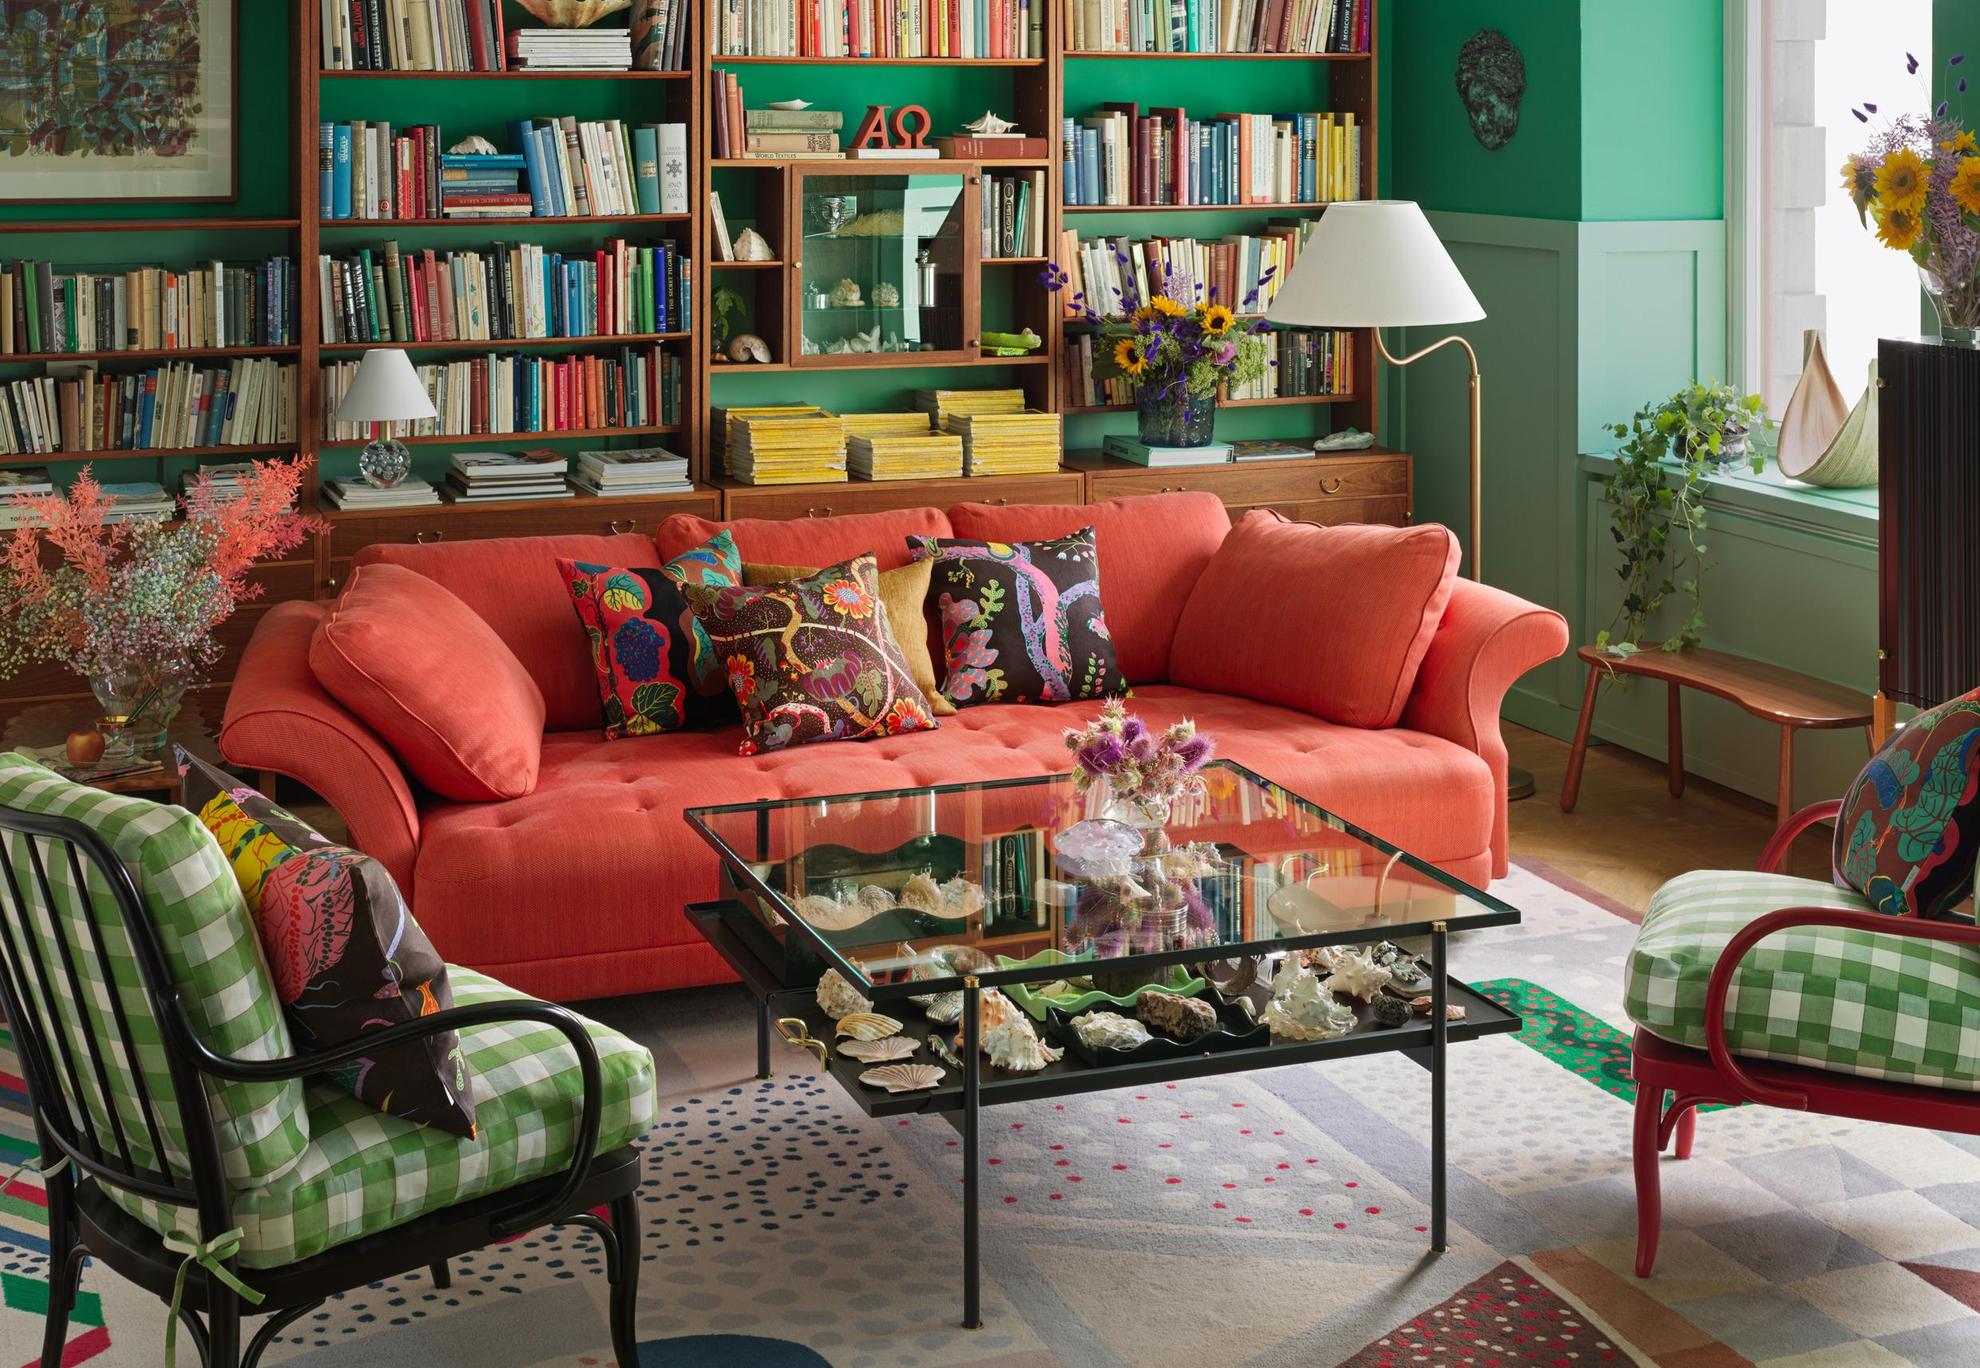 A living room at the interior design store Svenskt Tenn. A square table and two armchairs in front of a red sofa. Vases, books, candlesticks and other interior design items decorates the room.